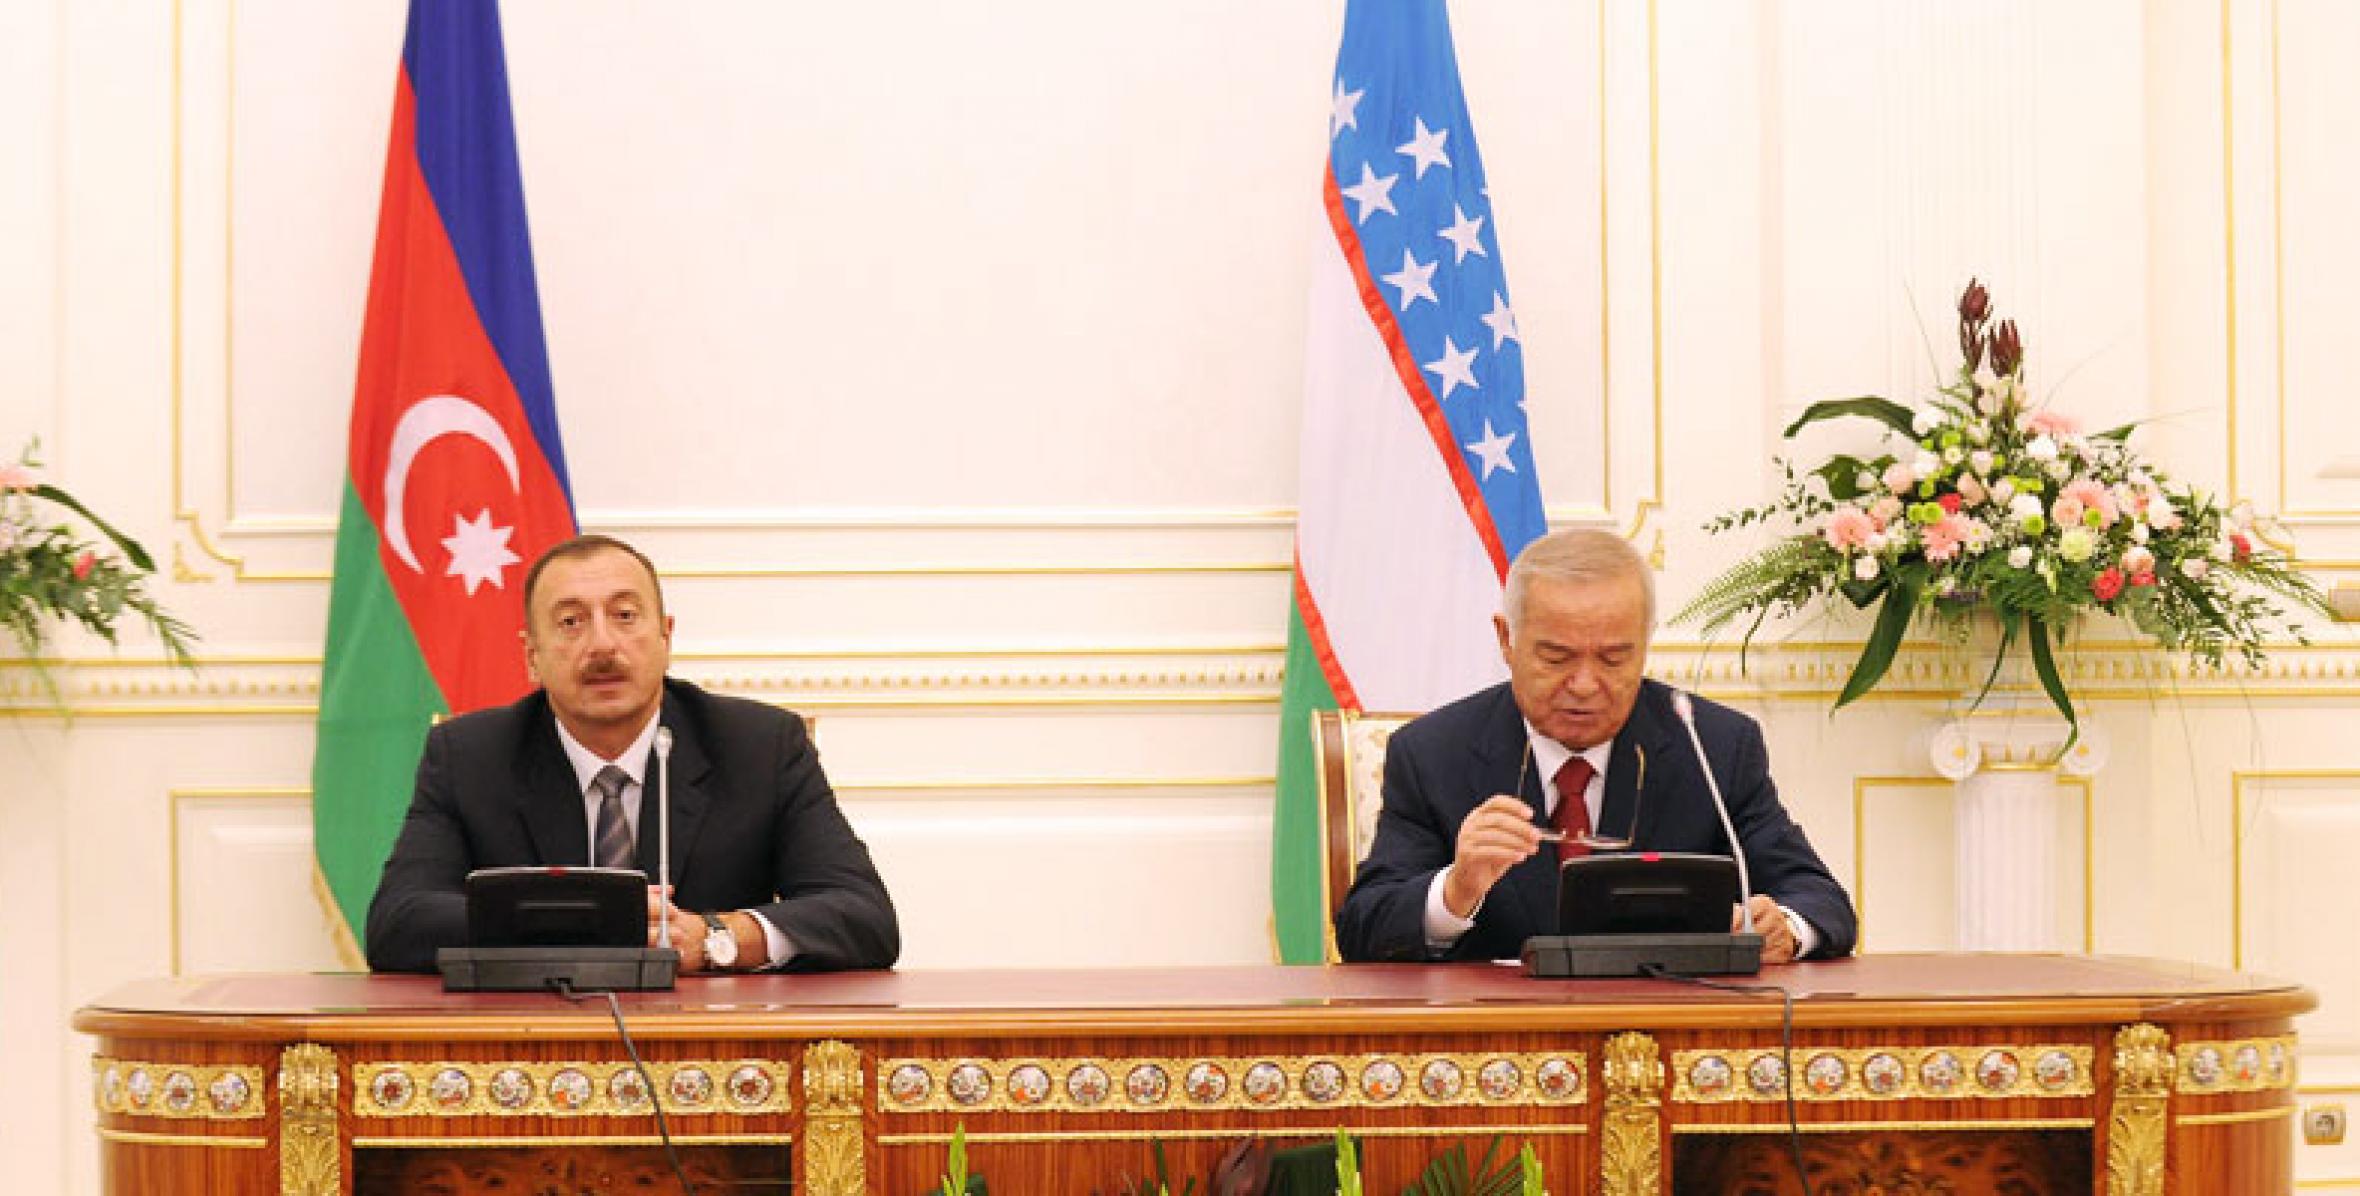 Ilham Aliyev and Islam Karimov made statements for the press